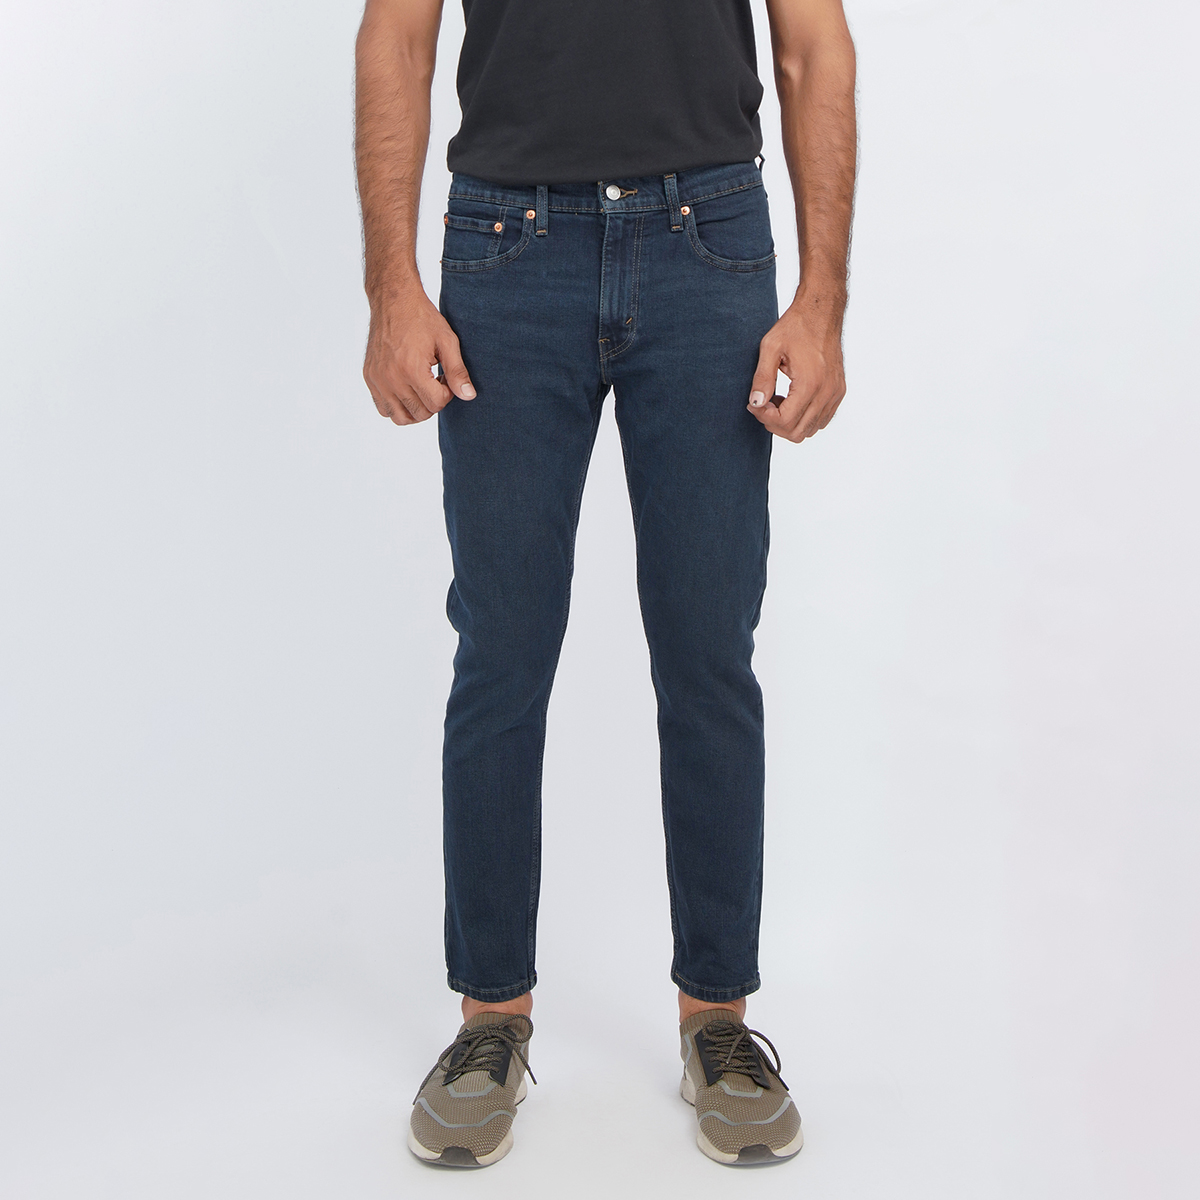 Mens Jeans Price In Pakistan - Rs. 700 On 0% Installment